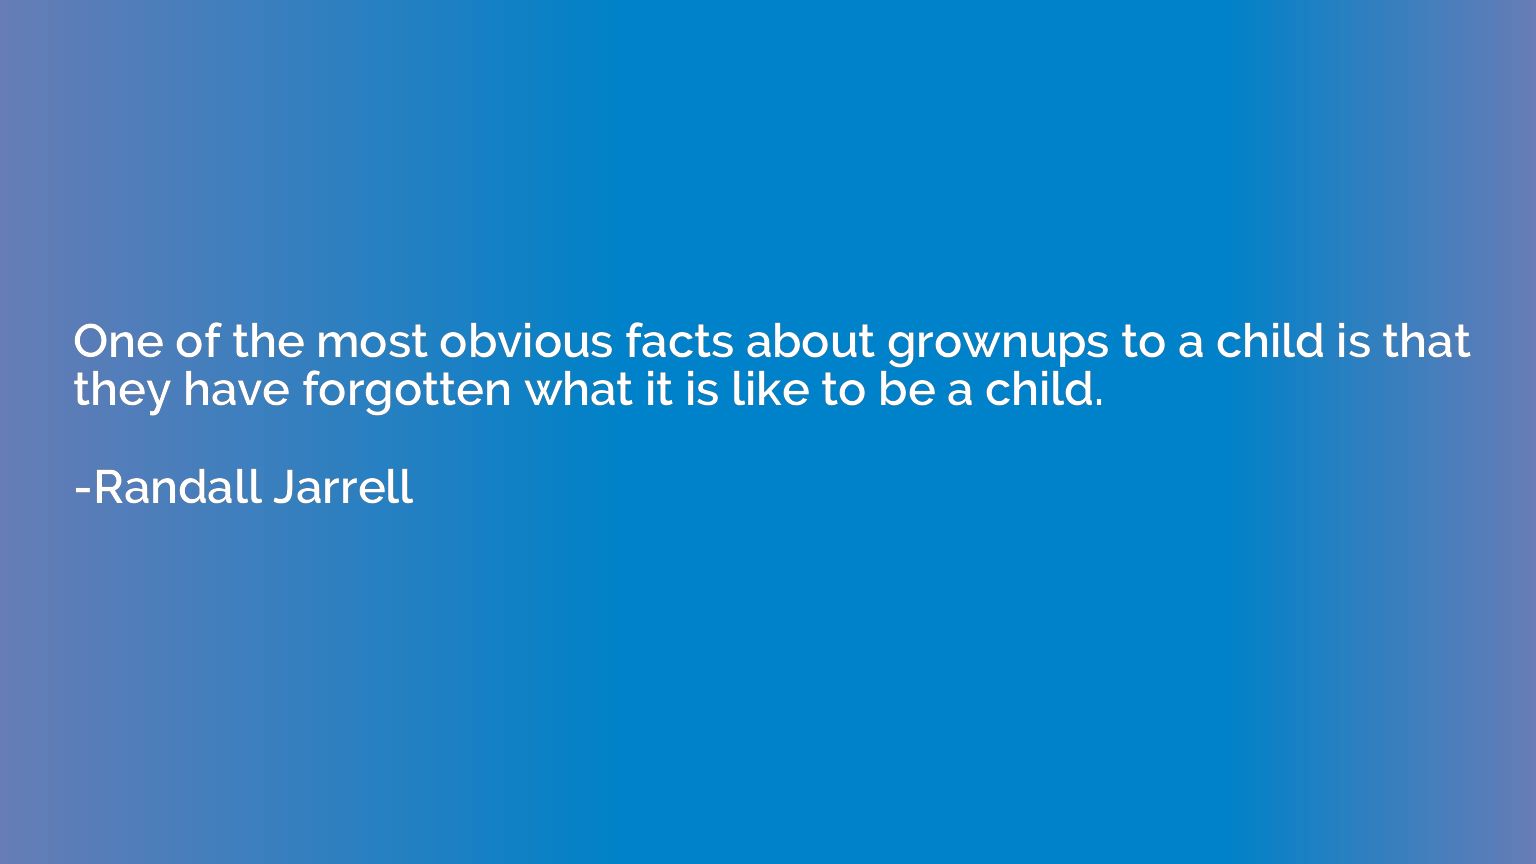 One of the most obvious facts about grownups to a child is t